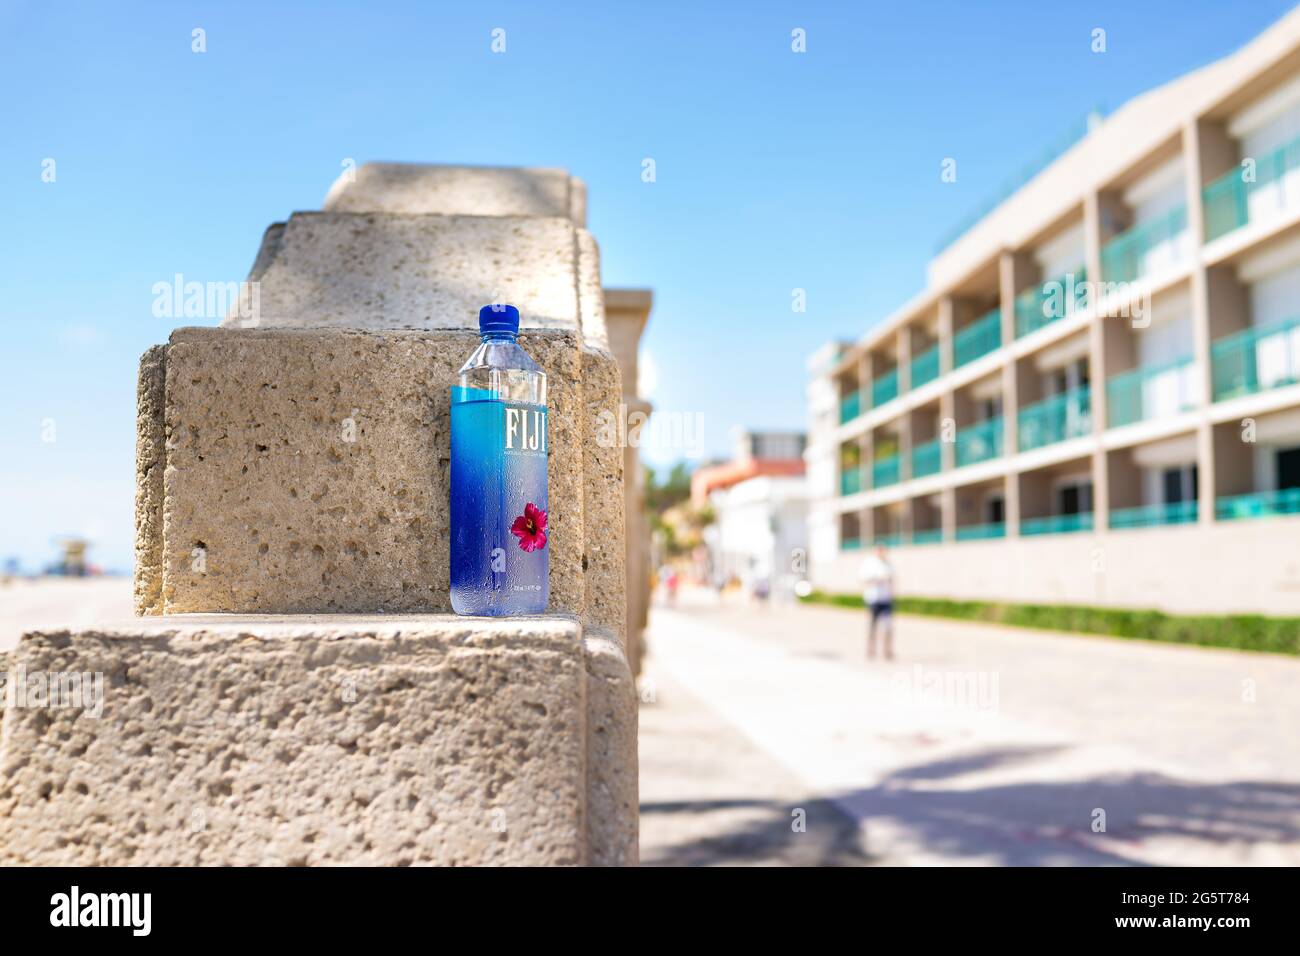 Hollywood, USA - May 6, 2018: Beach broadwalk promenade in Florida at sunny day and Fiji water bottle with condensation drops on plastic illustrative Stock Photo